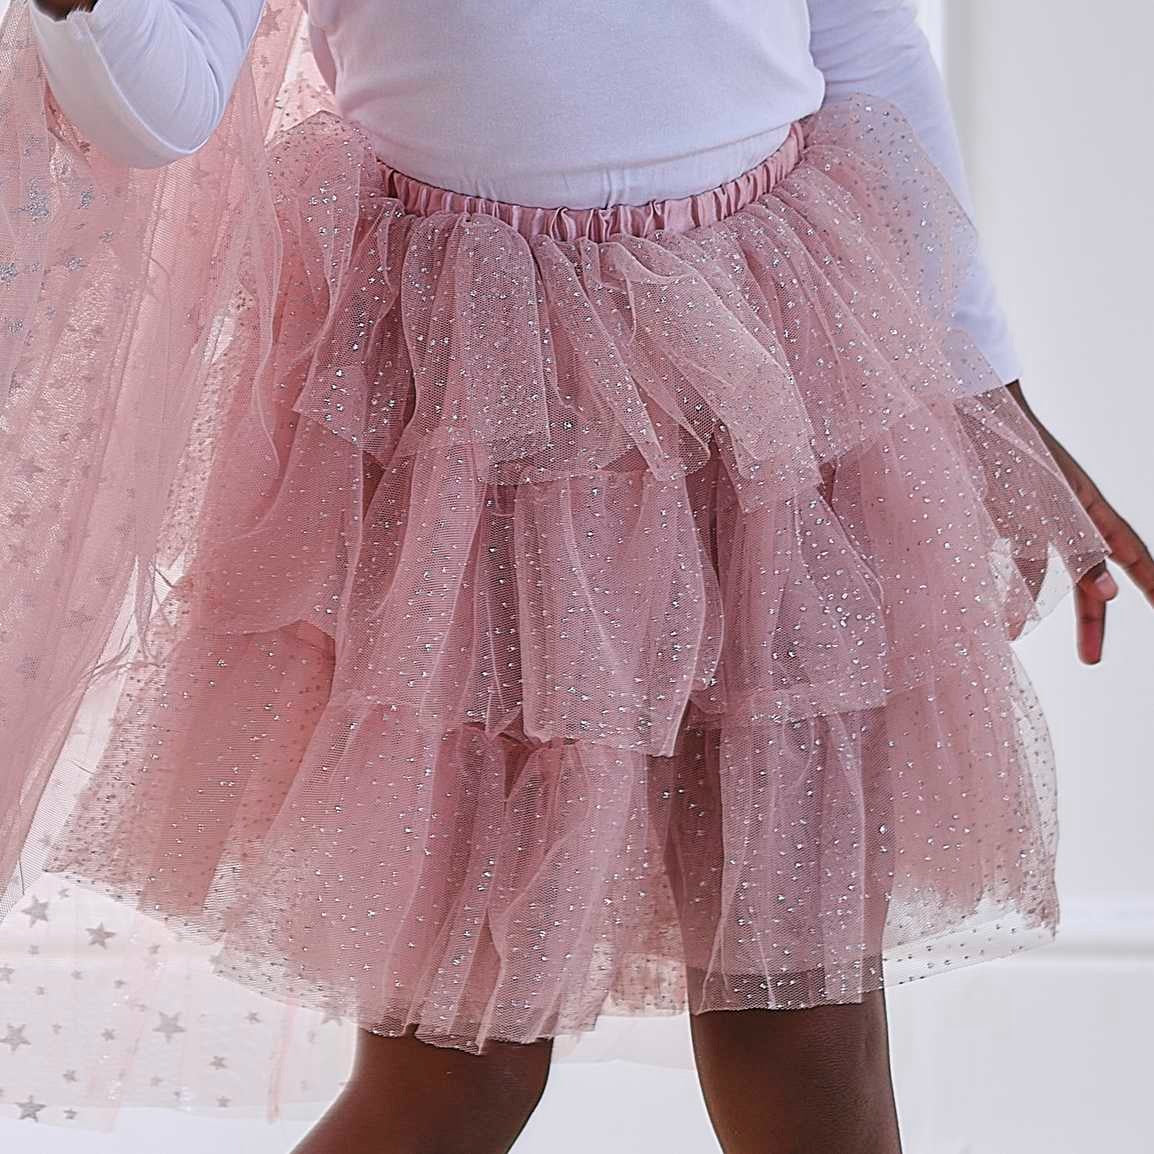 Tutu Pink & Silver with glitter 5-7 years